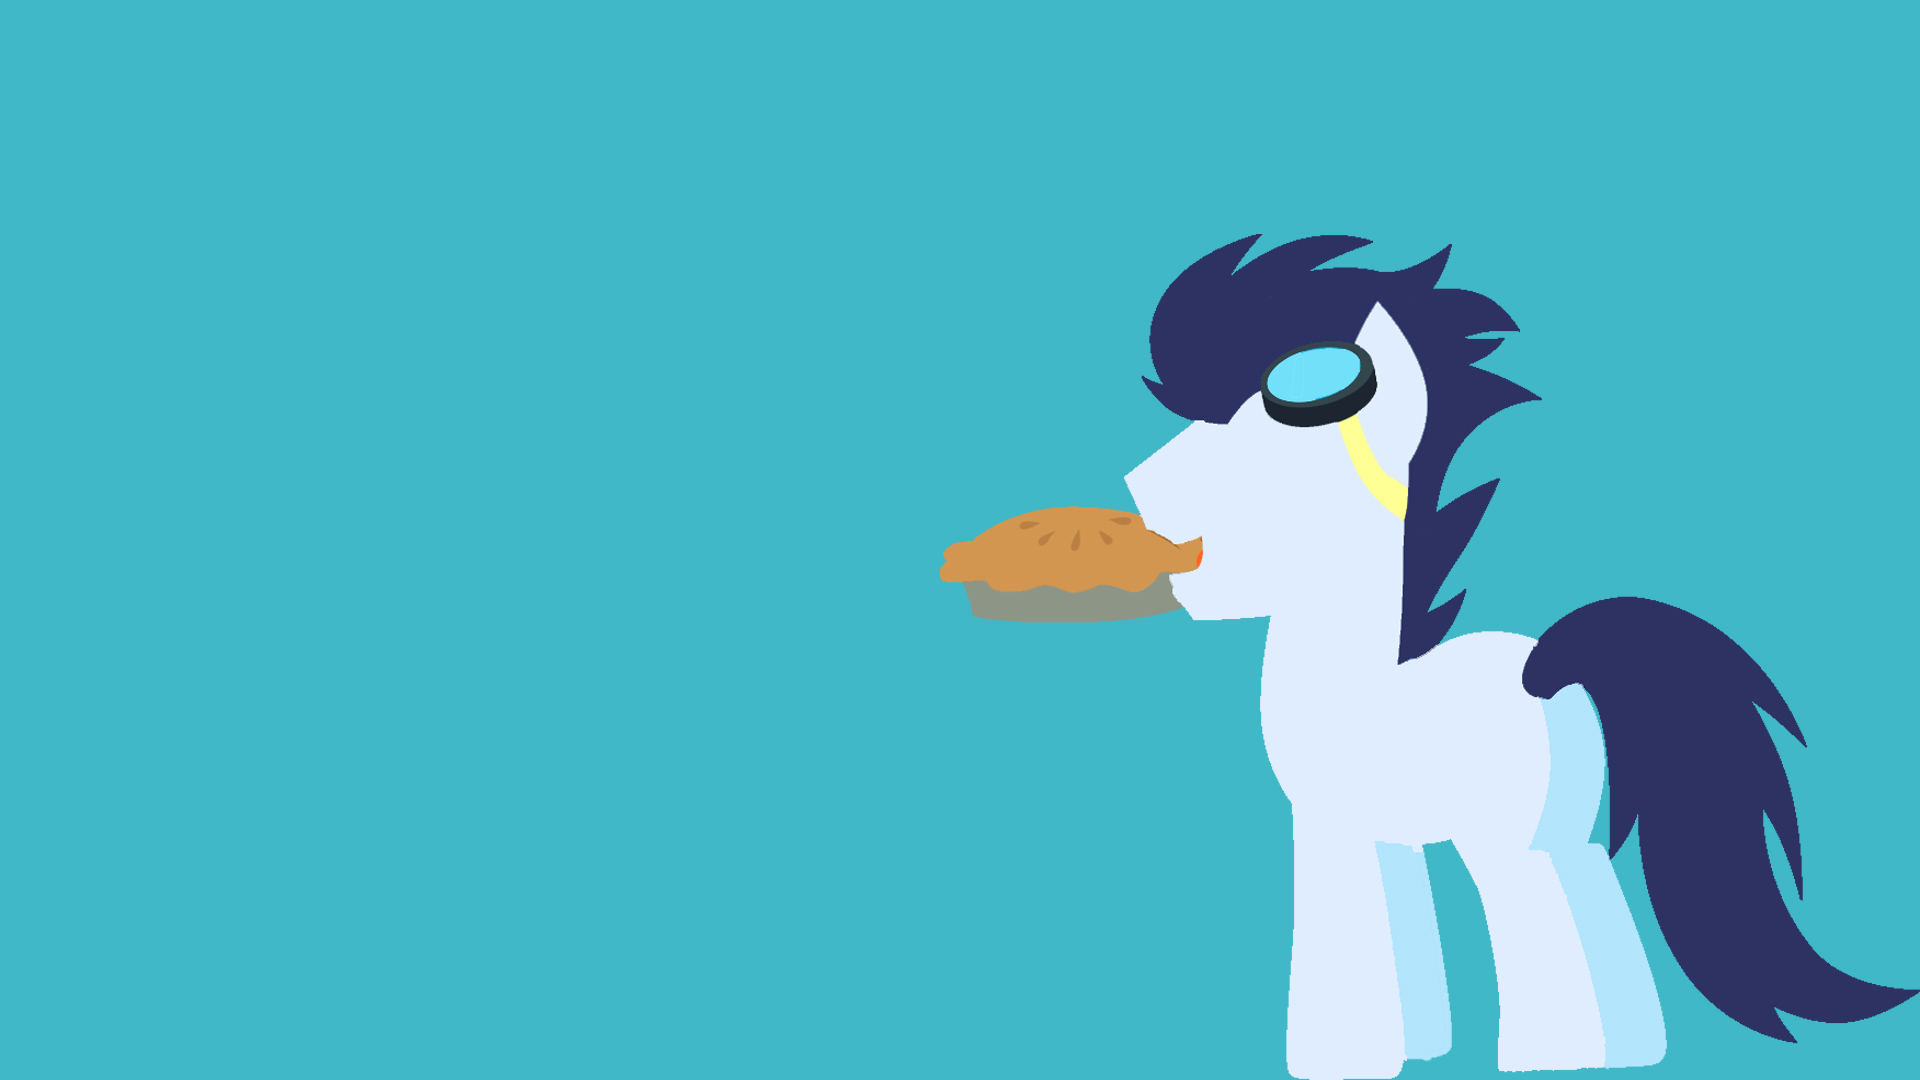 Soarin Wallpaper by BlissfulBiscuit and miketueur